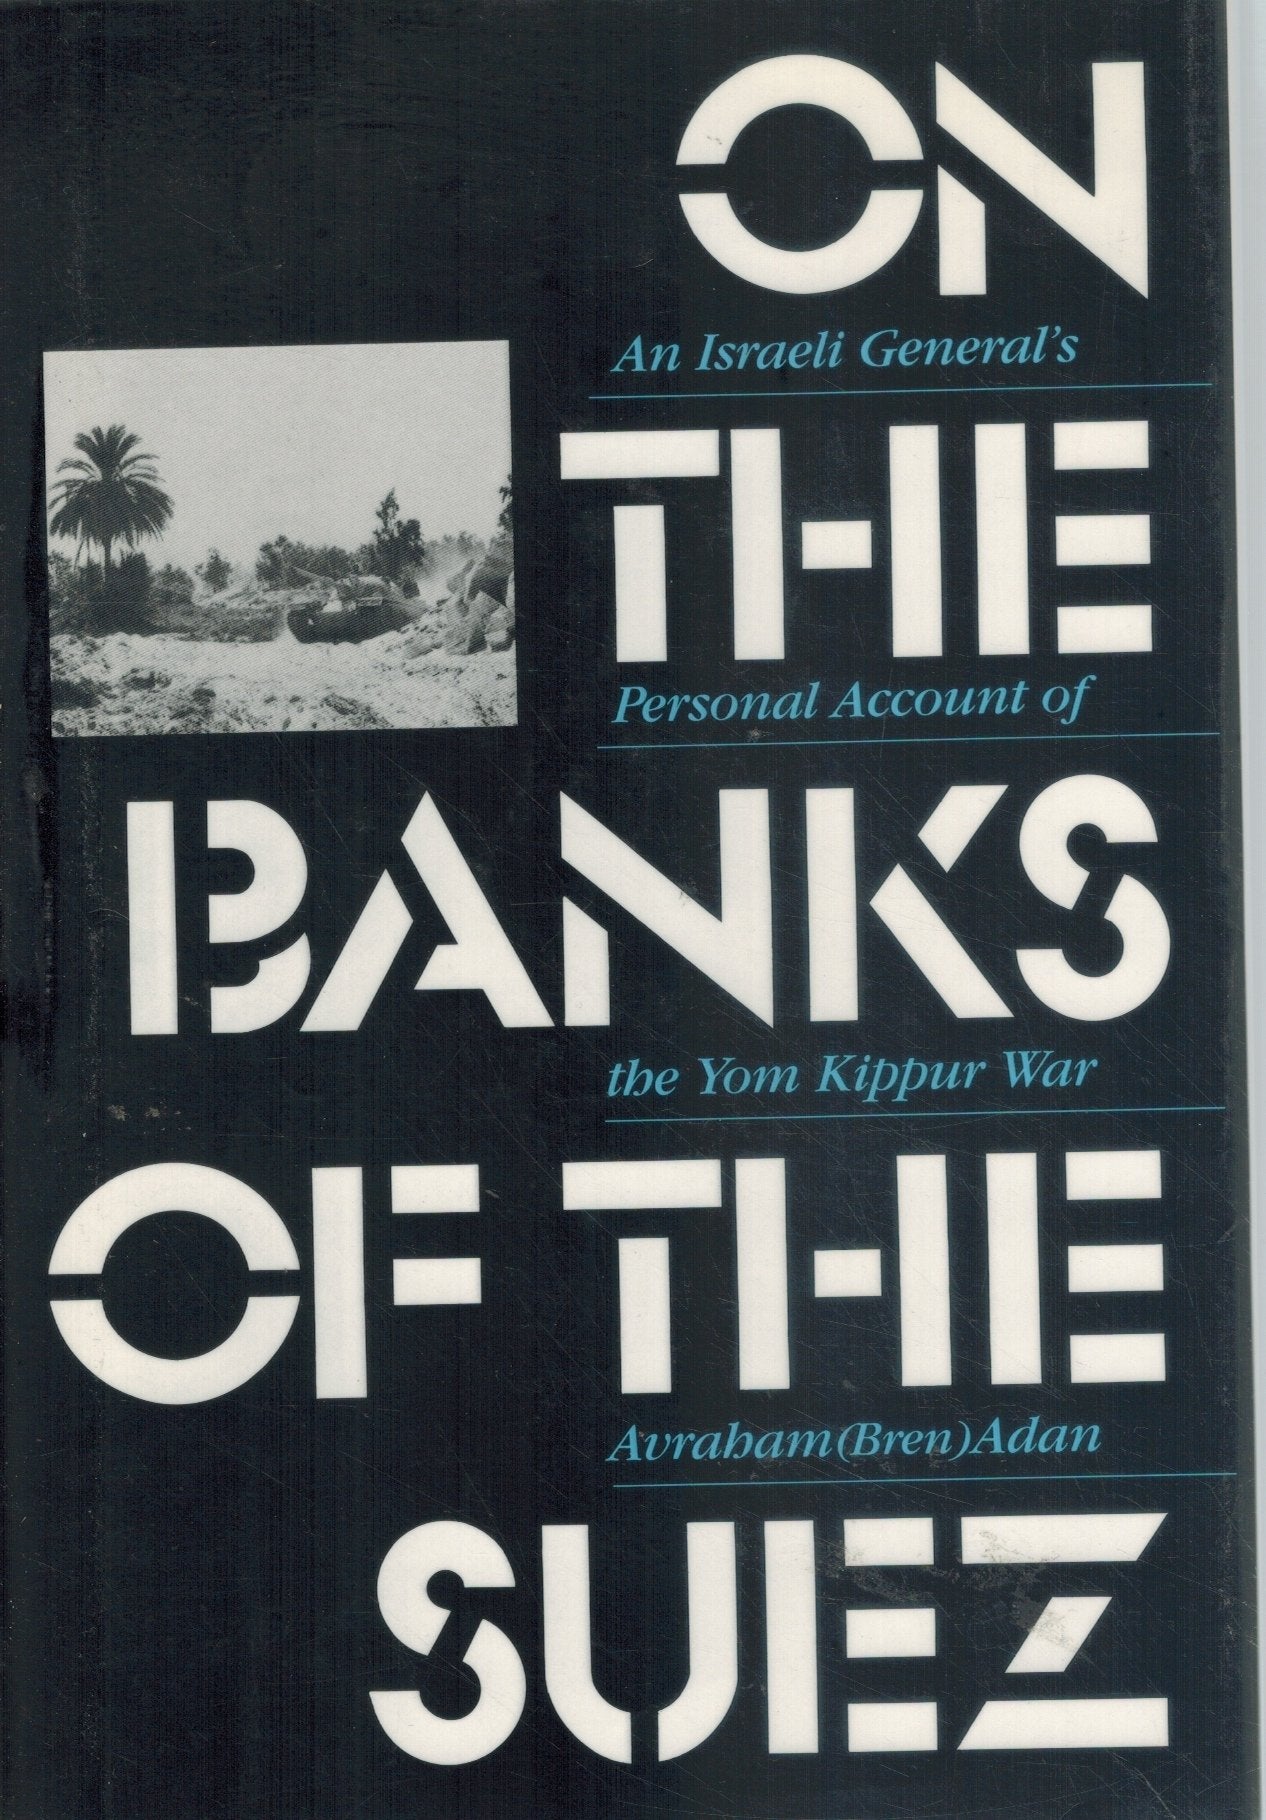 ON THE BANKS OF THE SUEZ An Israeli General's Personal Account of the Yom  Kippur War  by Adan, Avraham